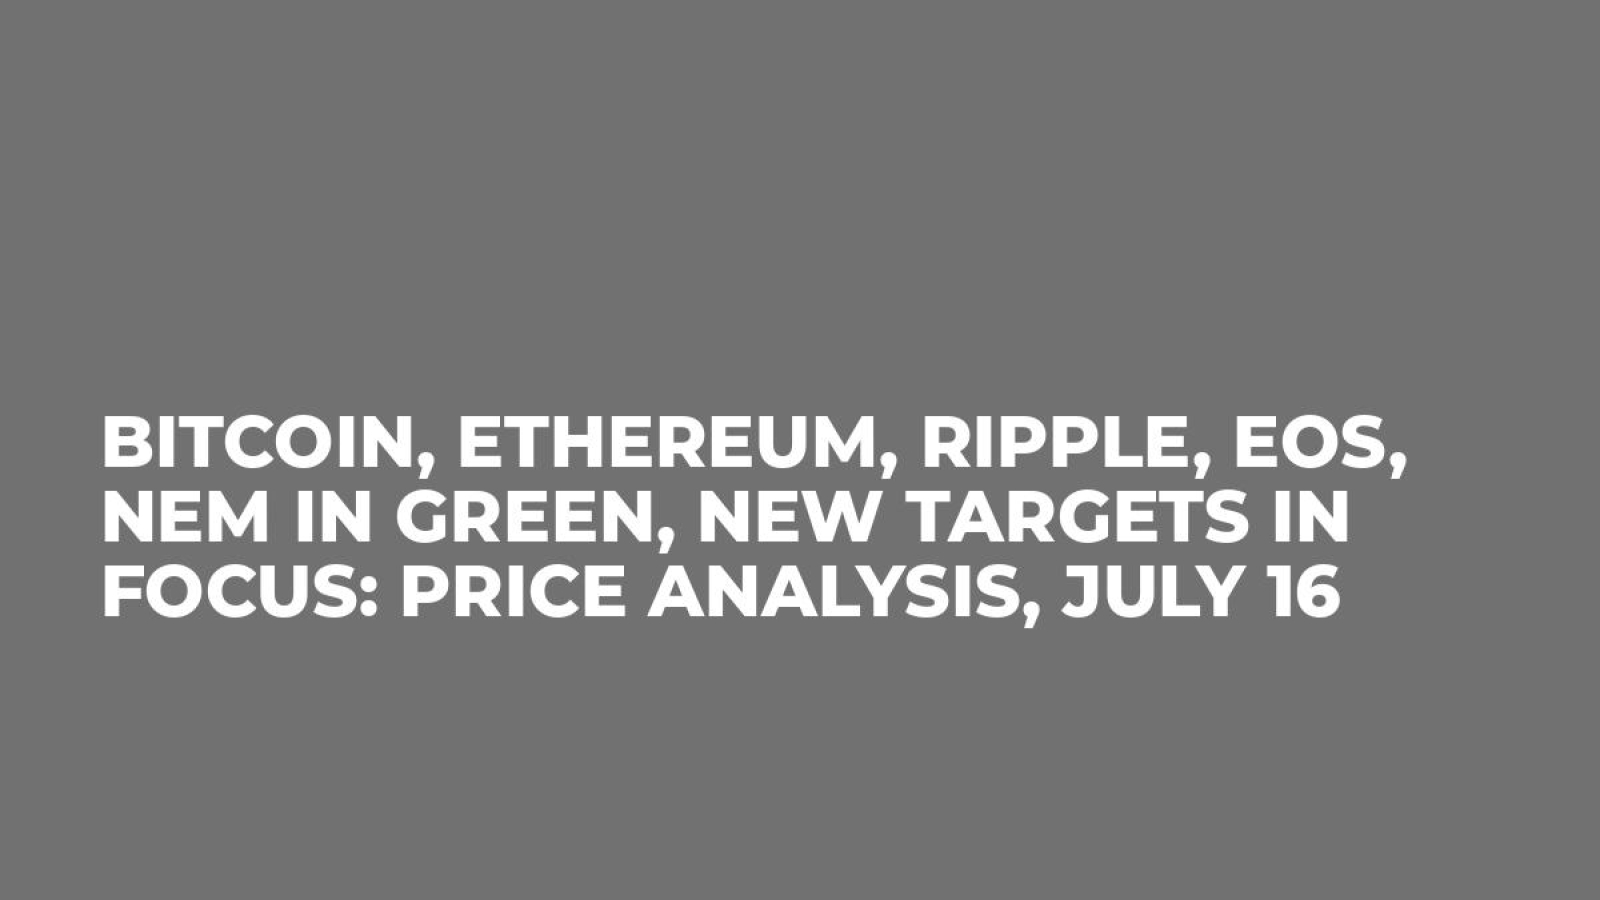 Bitcoin, Ethereum, Ripple, EOS, NEM in Green, New Targets in Focus: Price Analysis, July 16